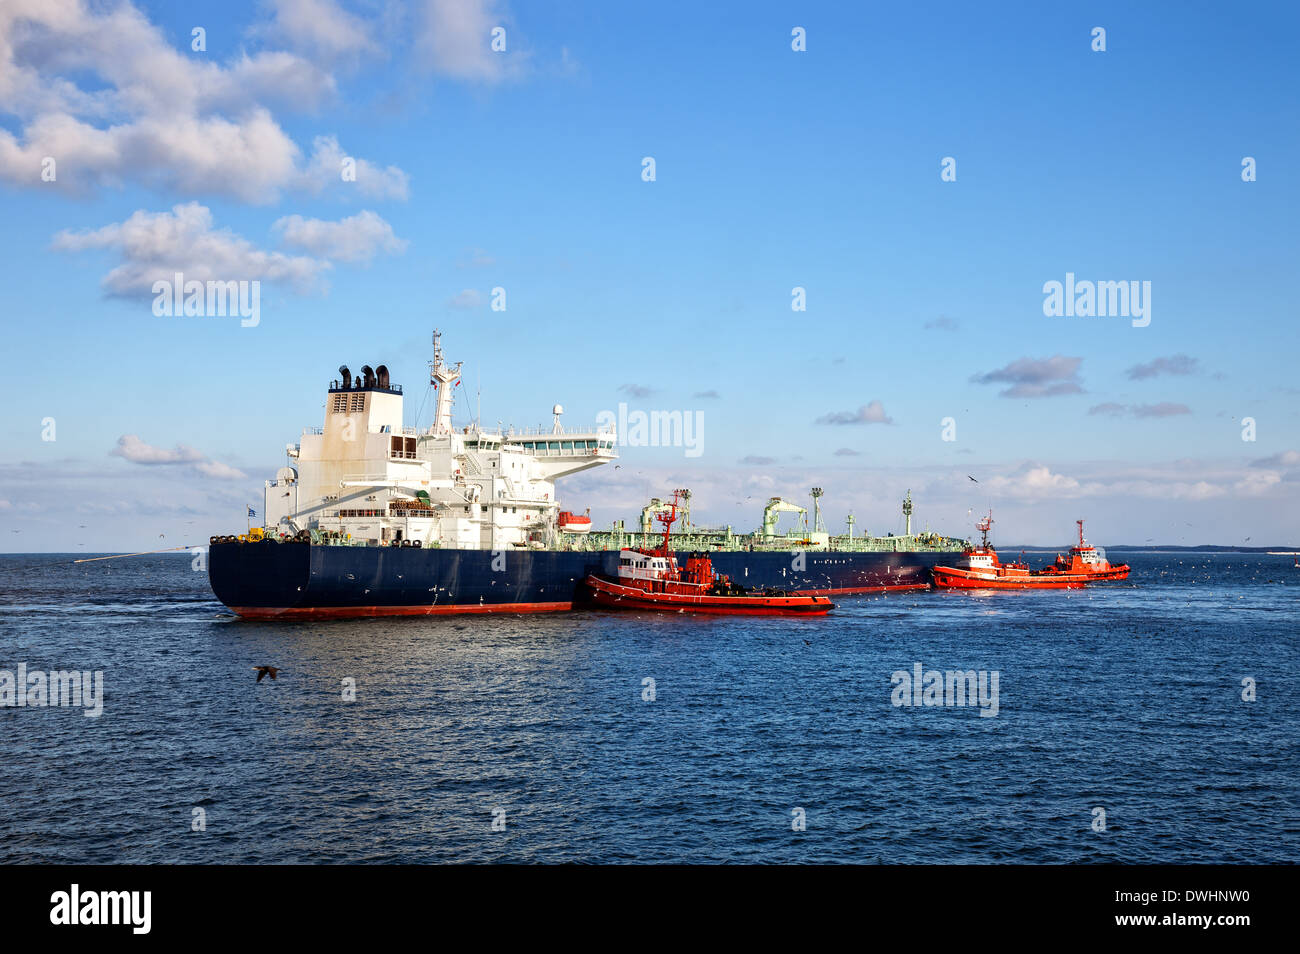 A huge oil tanker and three tugboats at work. Stock Photo